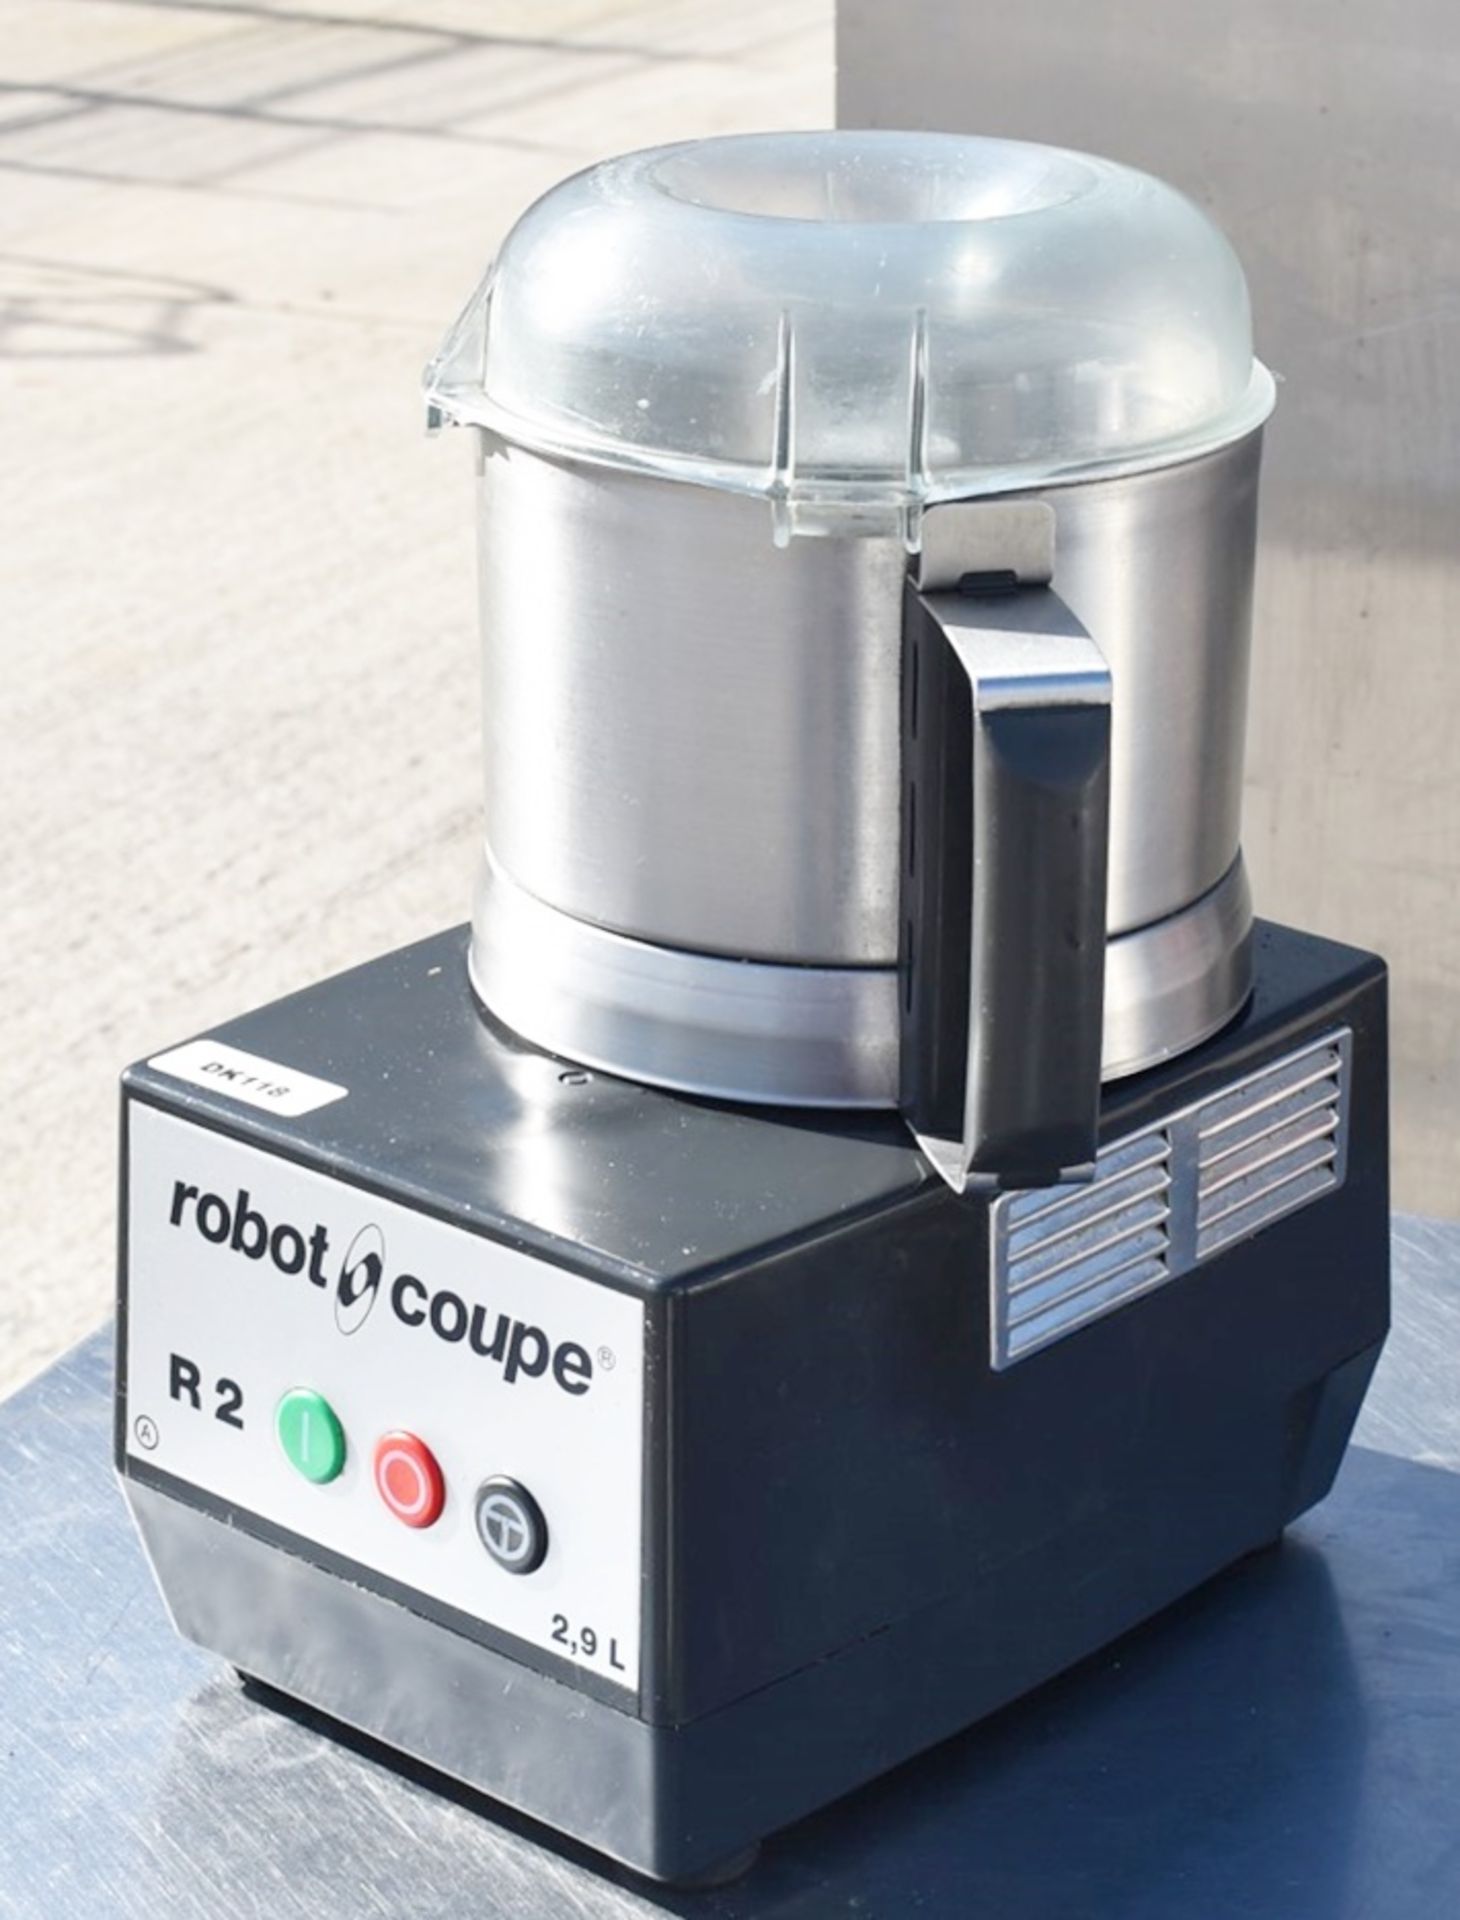 1 x Robot Coupe R2 Heavy Duty Cutter Blender - Recently Removed From a Dark Kitchen Environment